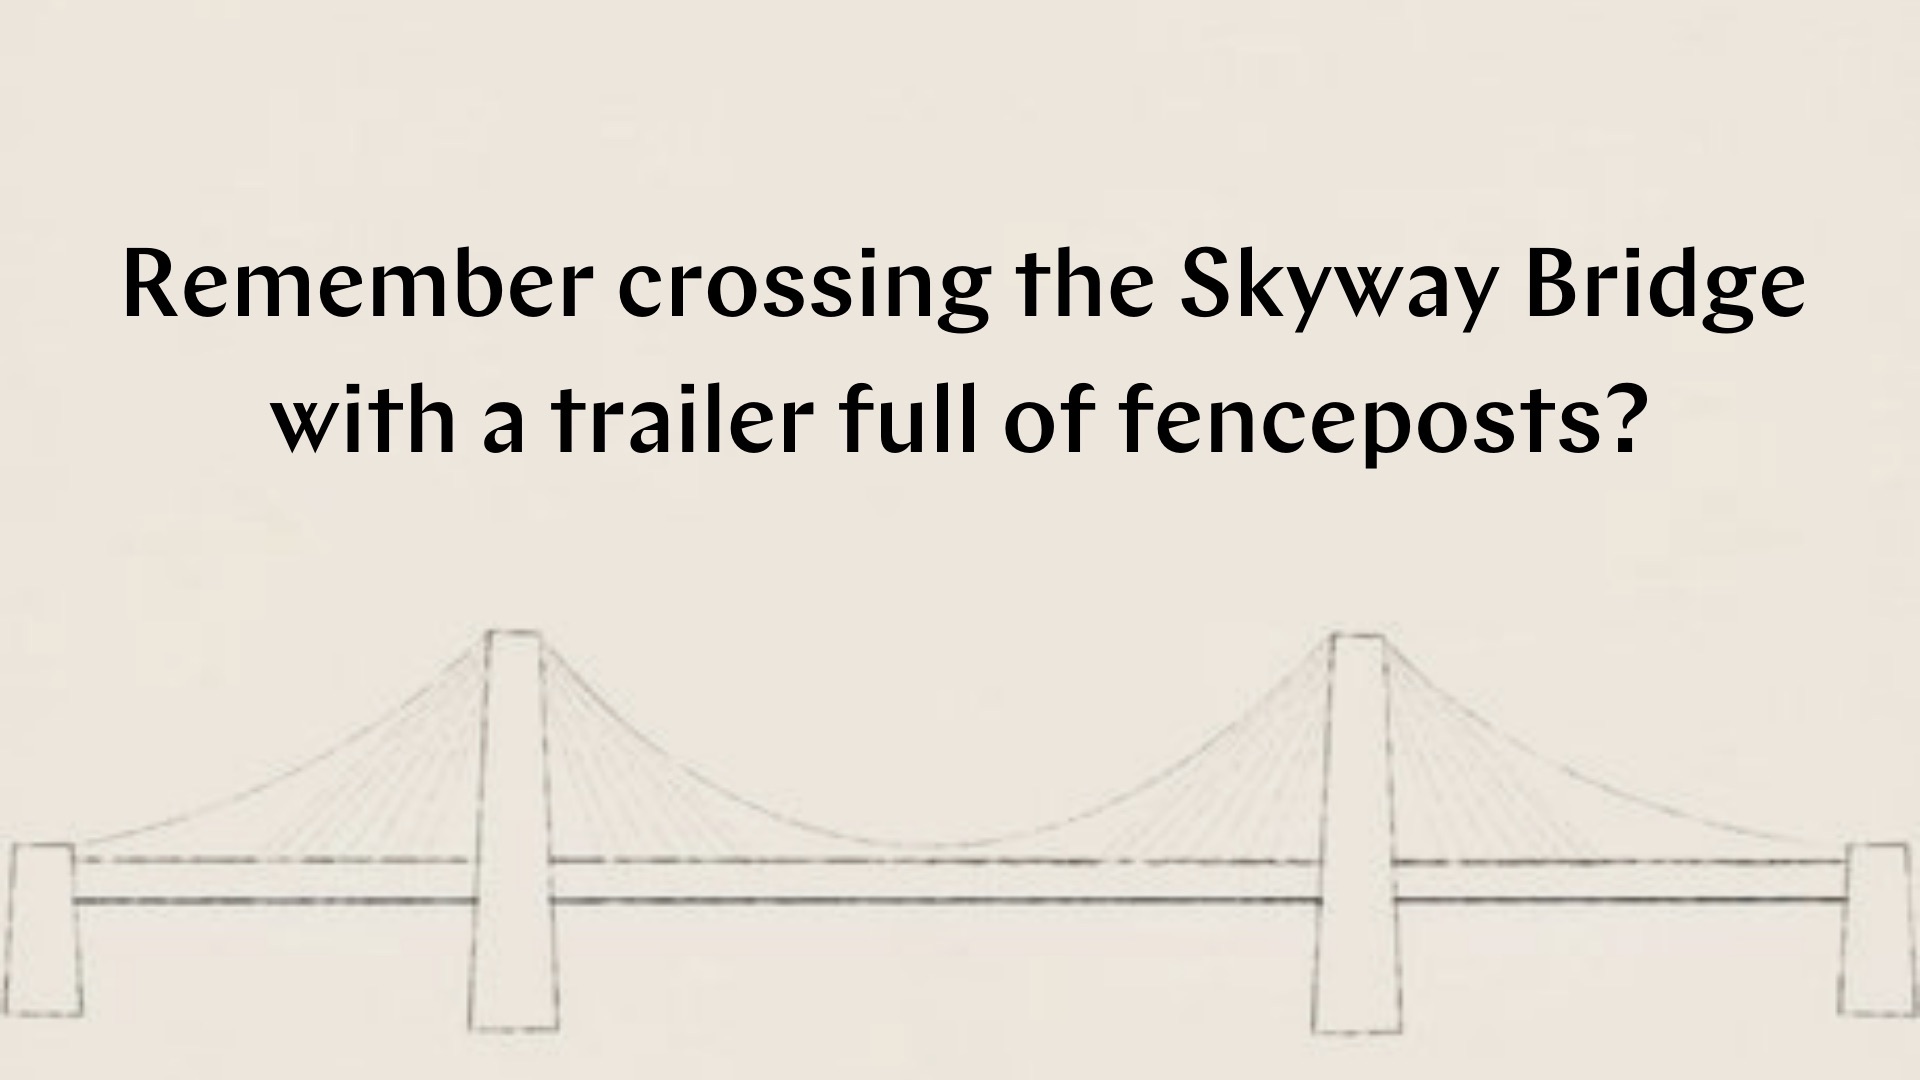 Remember crossing the Skyway Bridge with a trailer full of fenceposts?